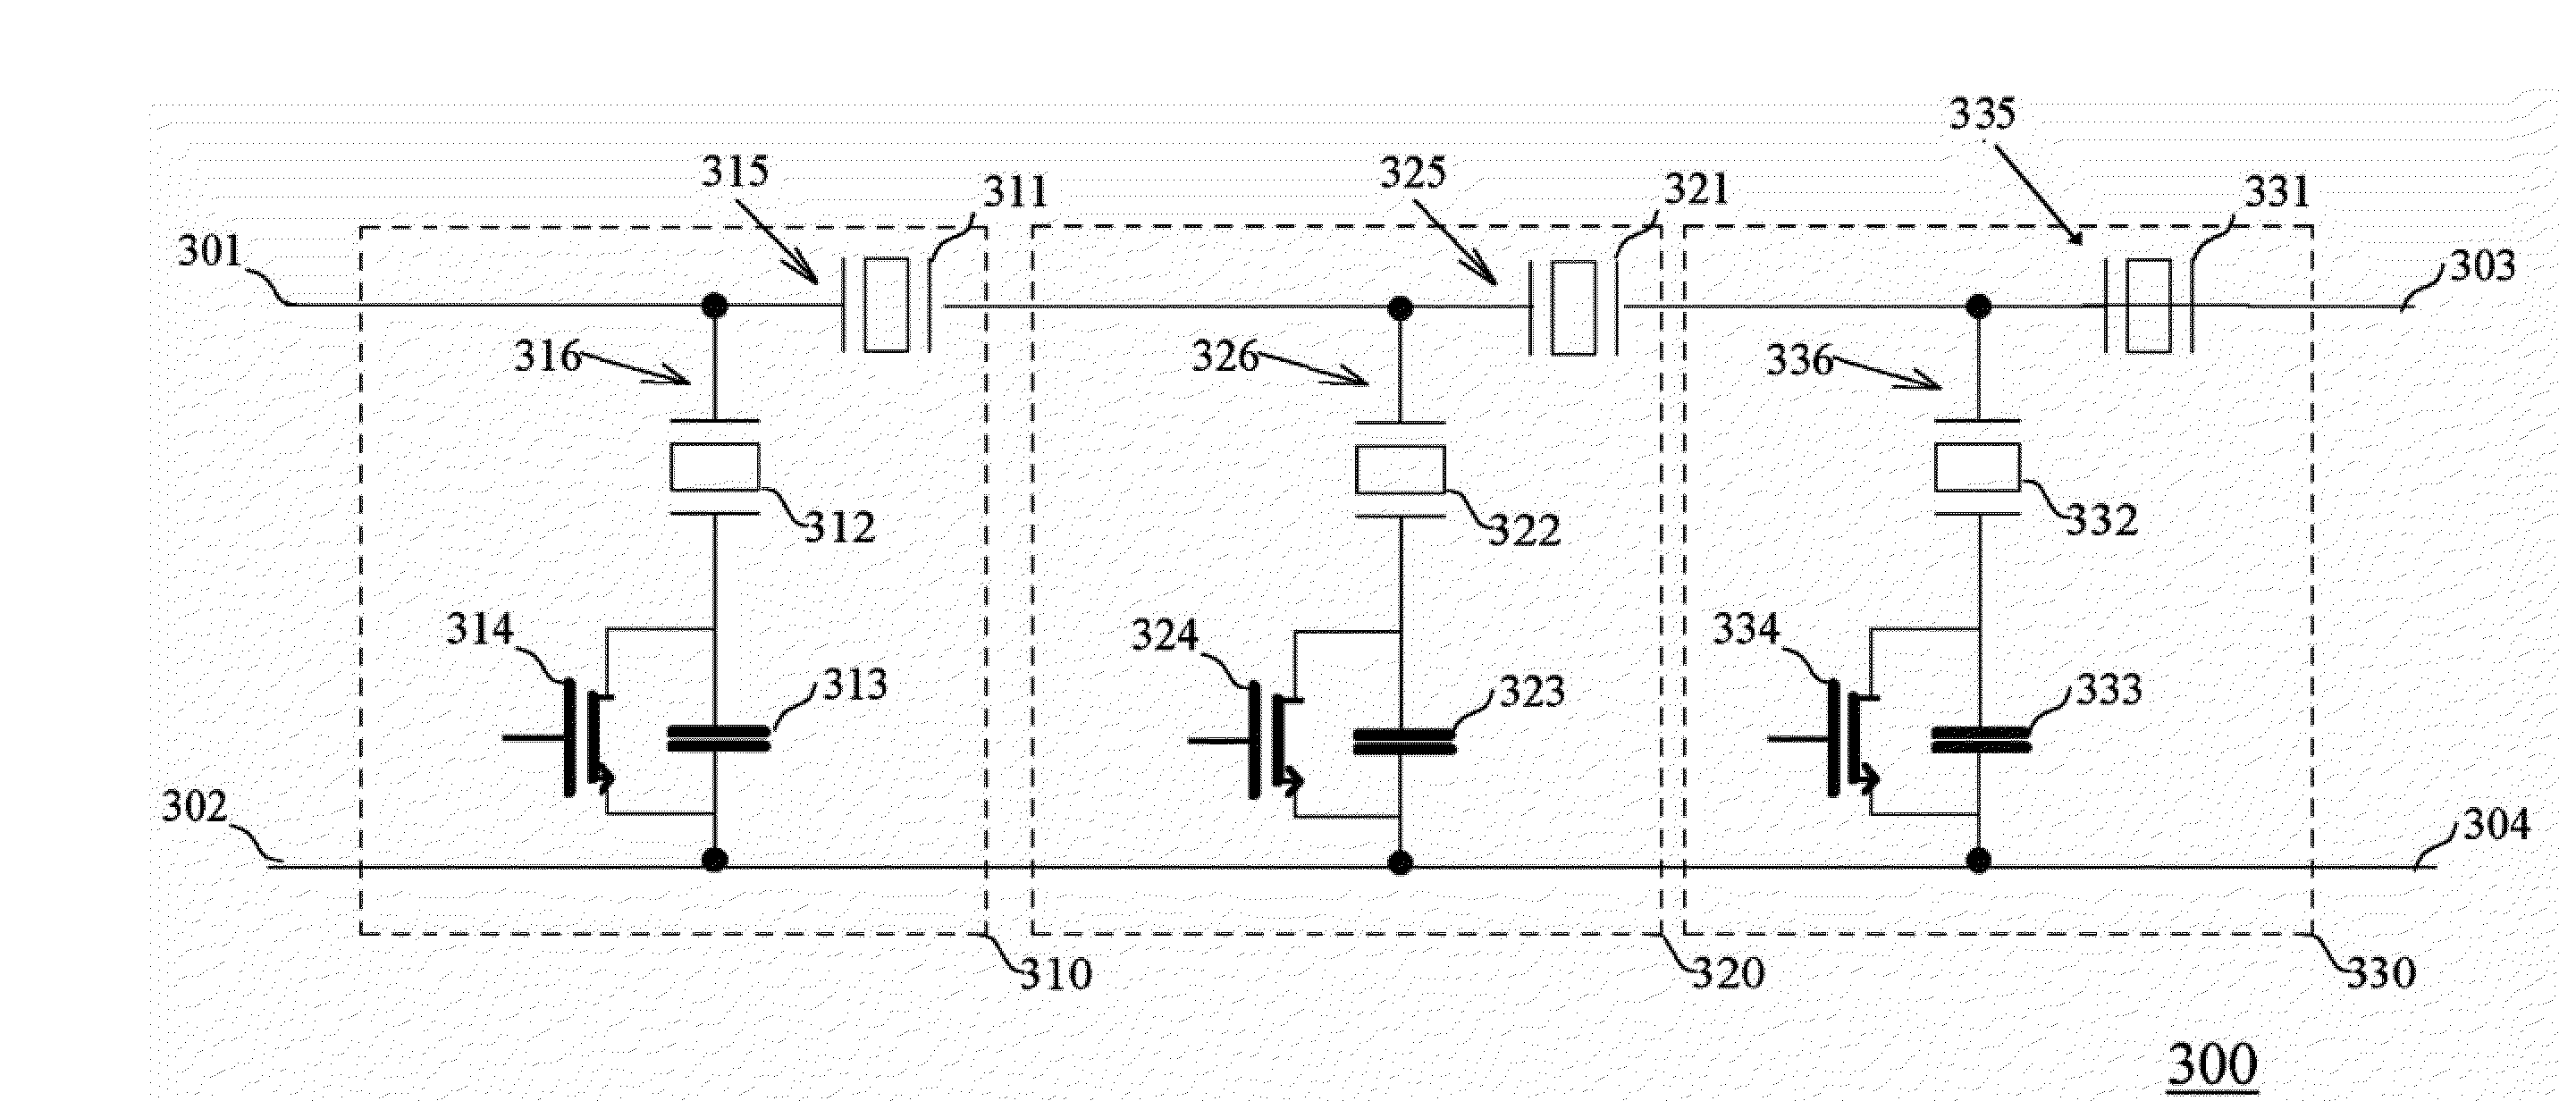 Bulk acoustic wave resonator filter being digitally reconfigurable, with process